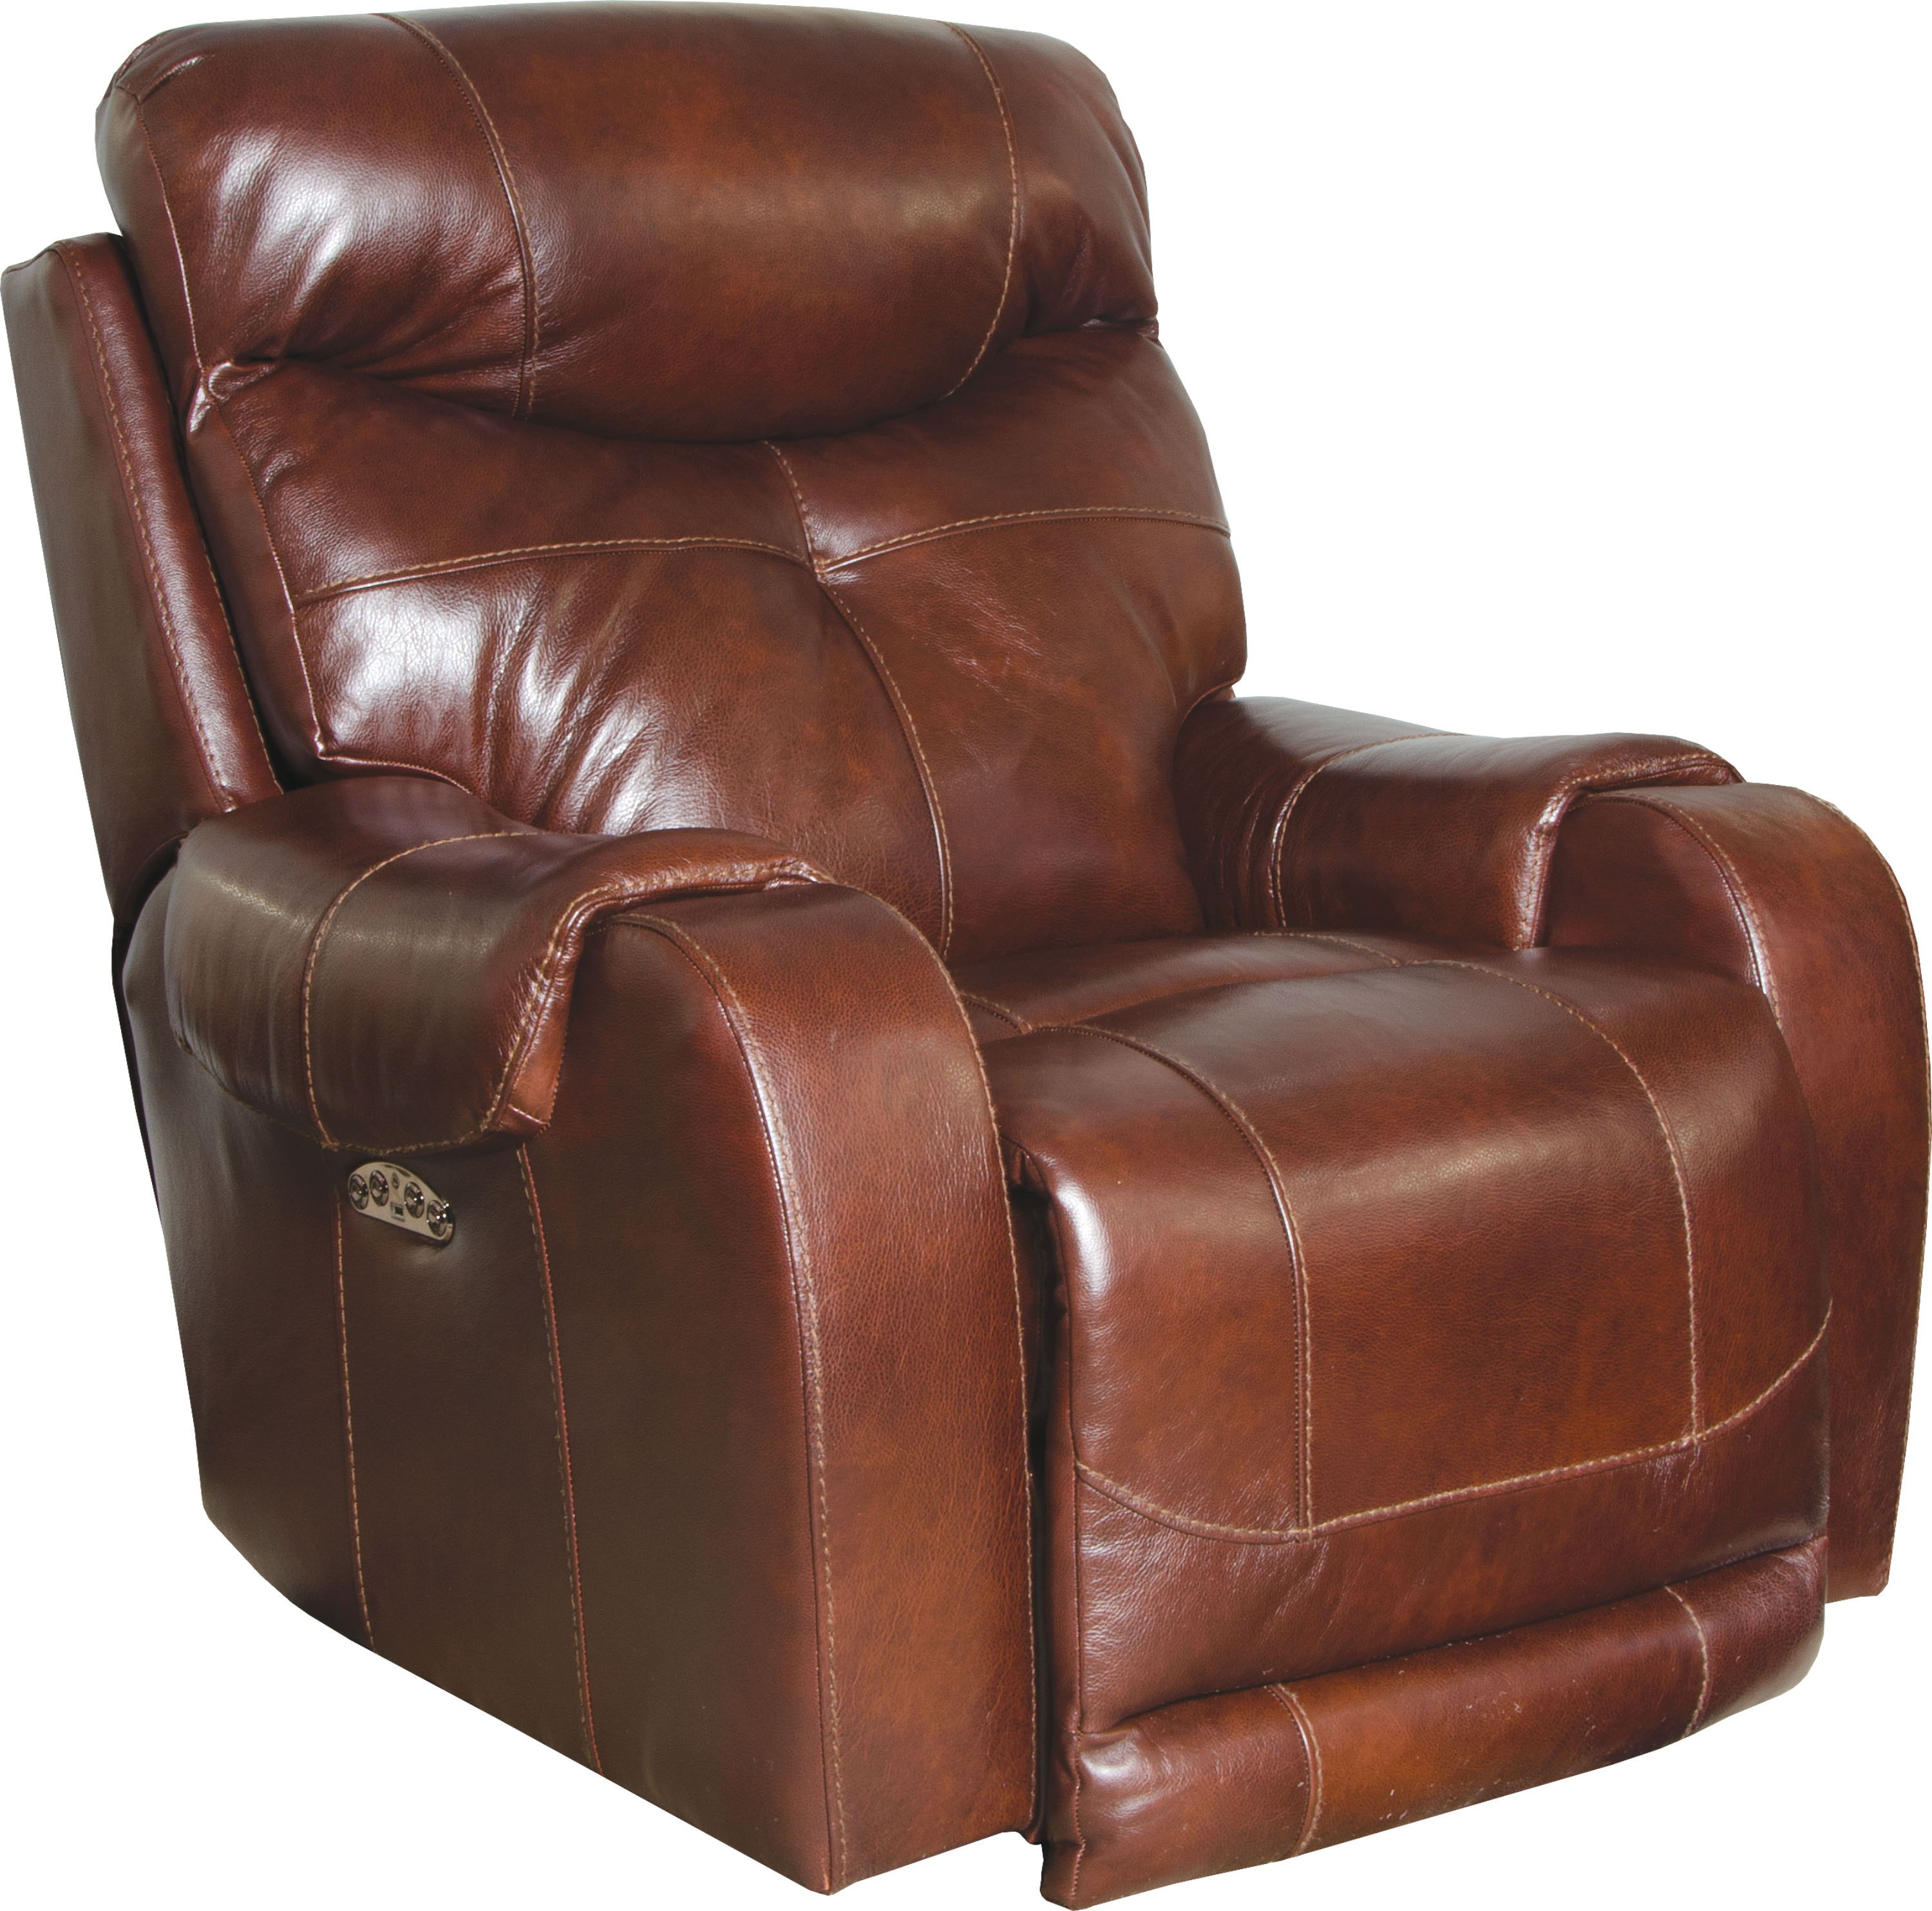 Venice - Power Headrest With Lumbar Power Lay Flat Recliner - Chocolate - 5th Avenue Furniture